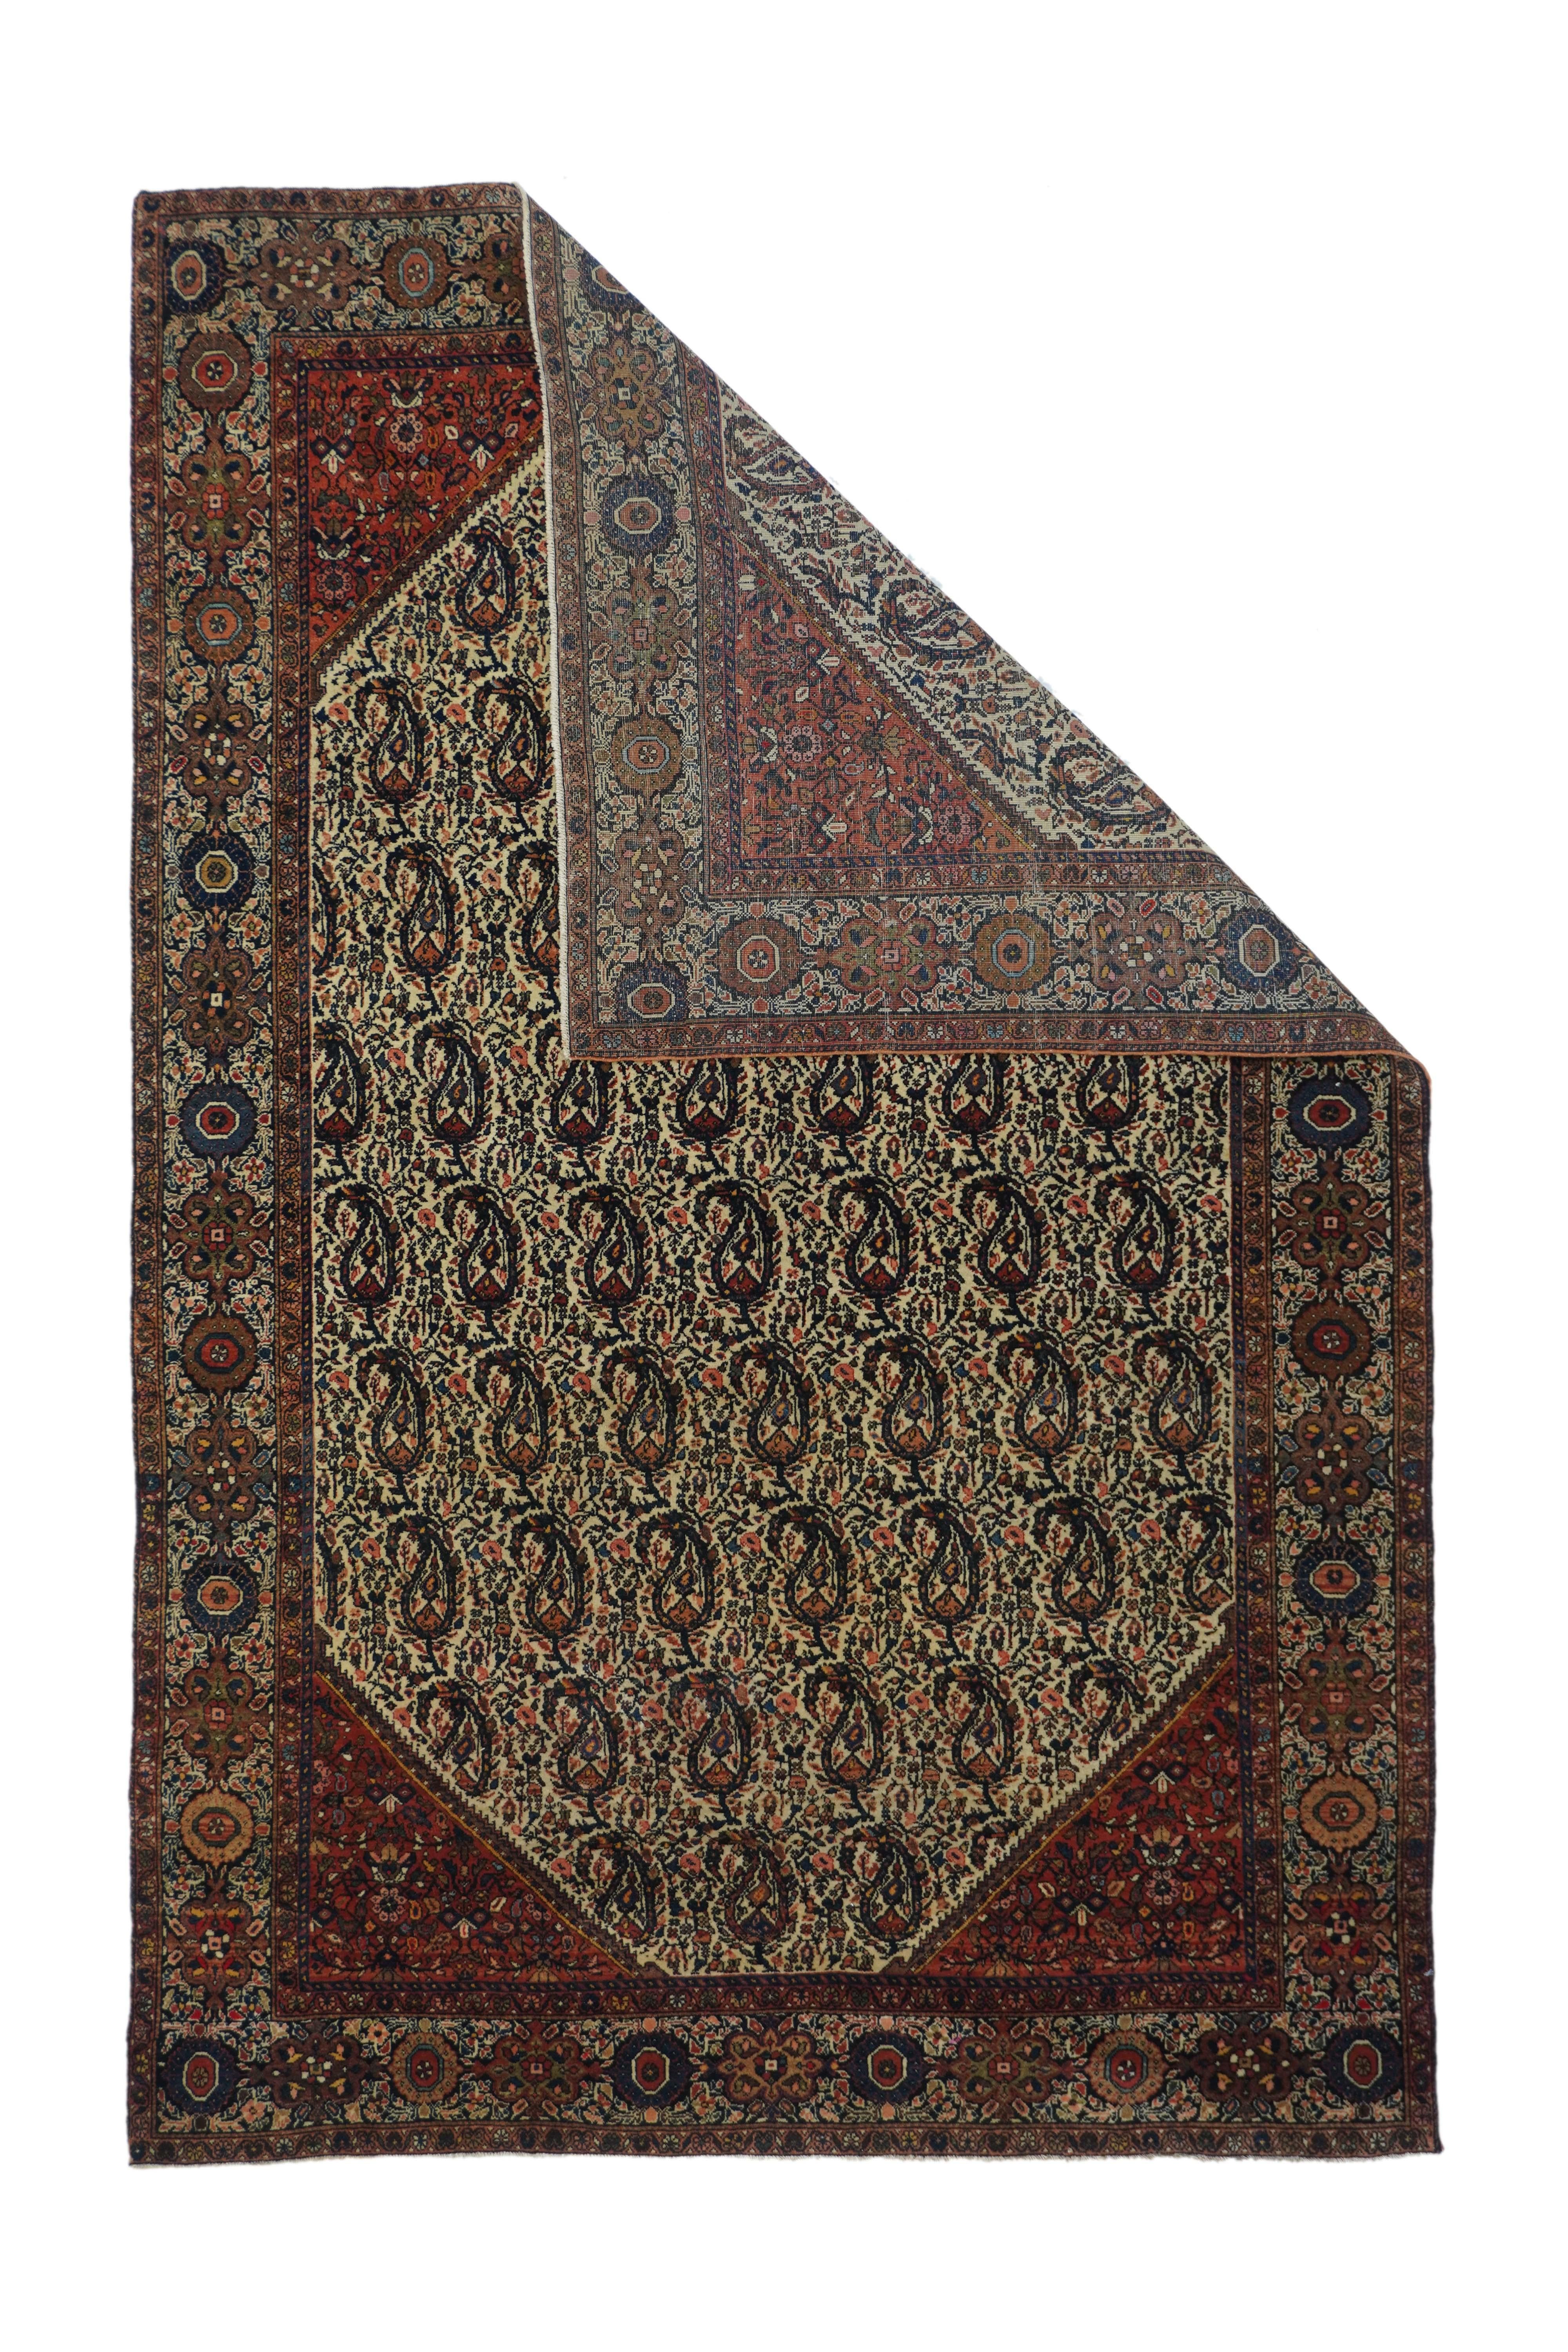 Antique Farahan Sarouk rug 4'3'' x 6'5''. Here is a well-woven village scatter with an elongated octagonal ecru field decorated with offset rows of unidirectional botehs, with a dense broken and floriated vinery between, and within stepped red